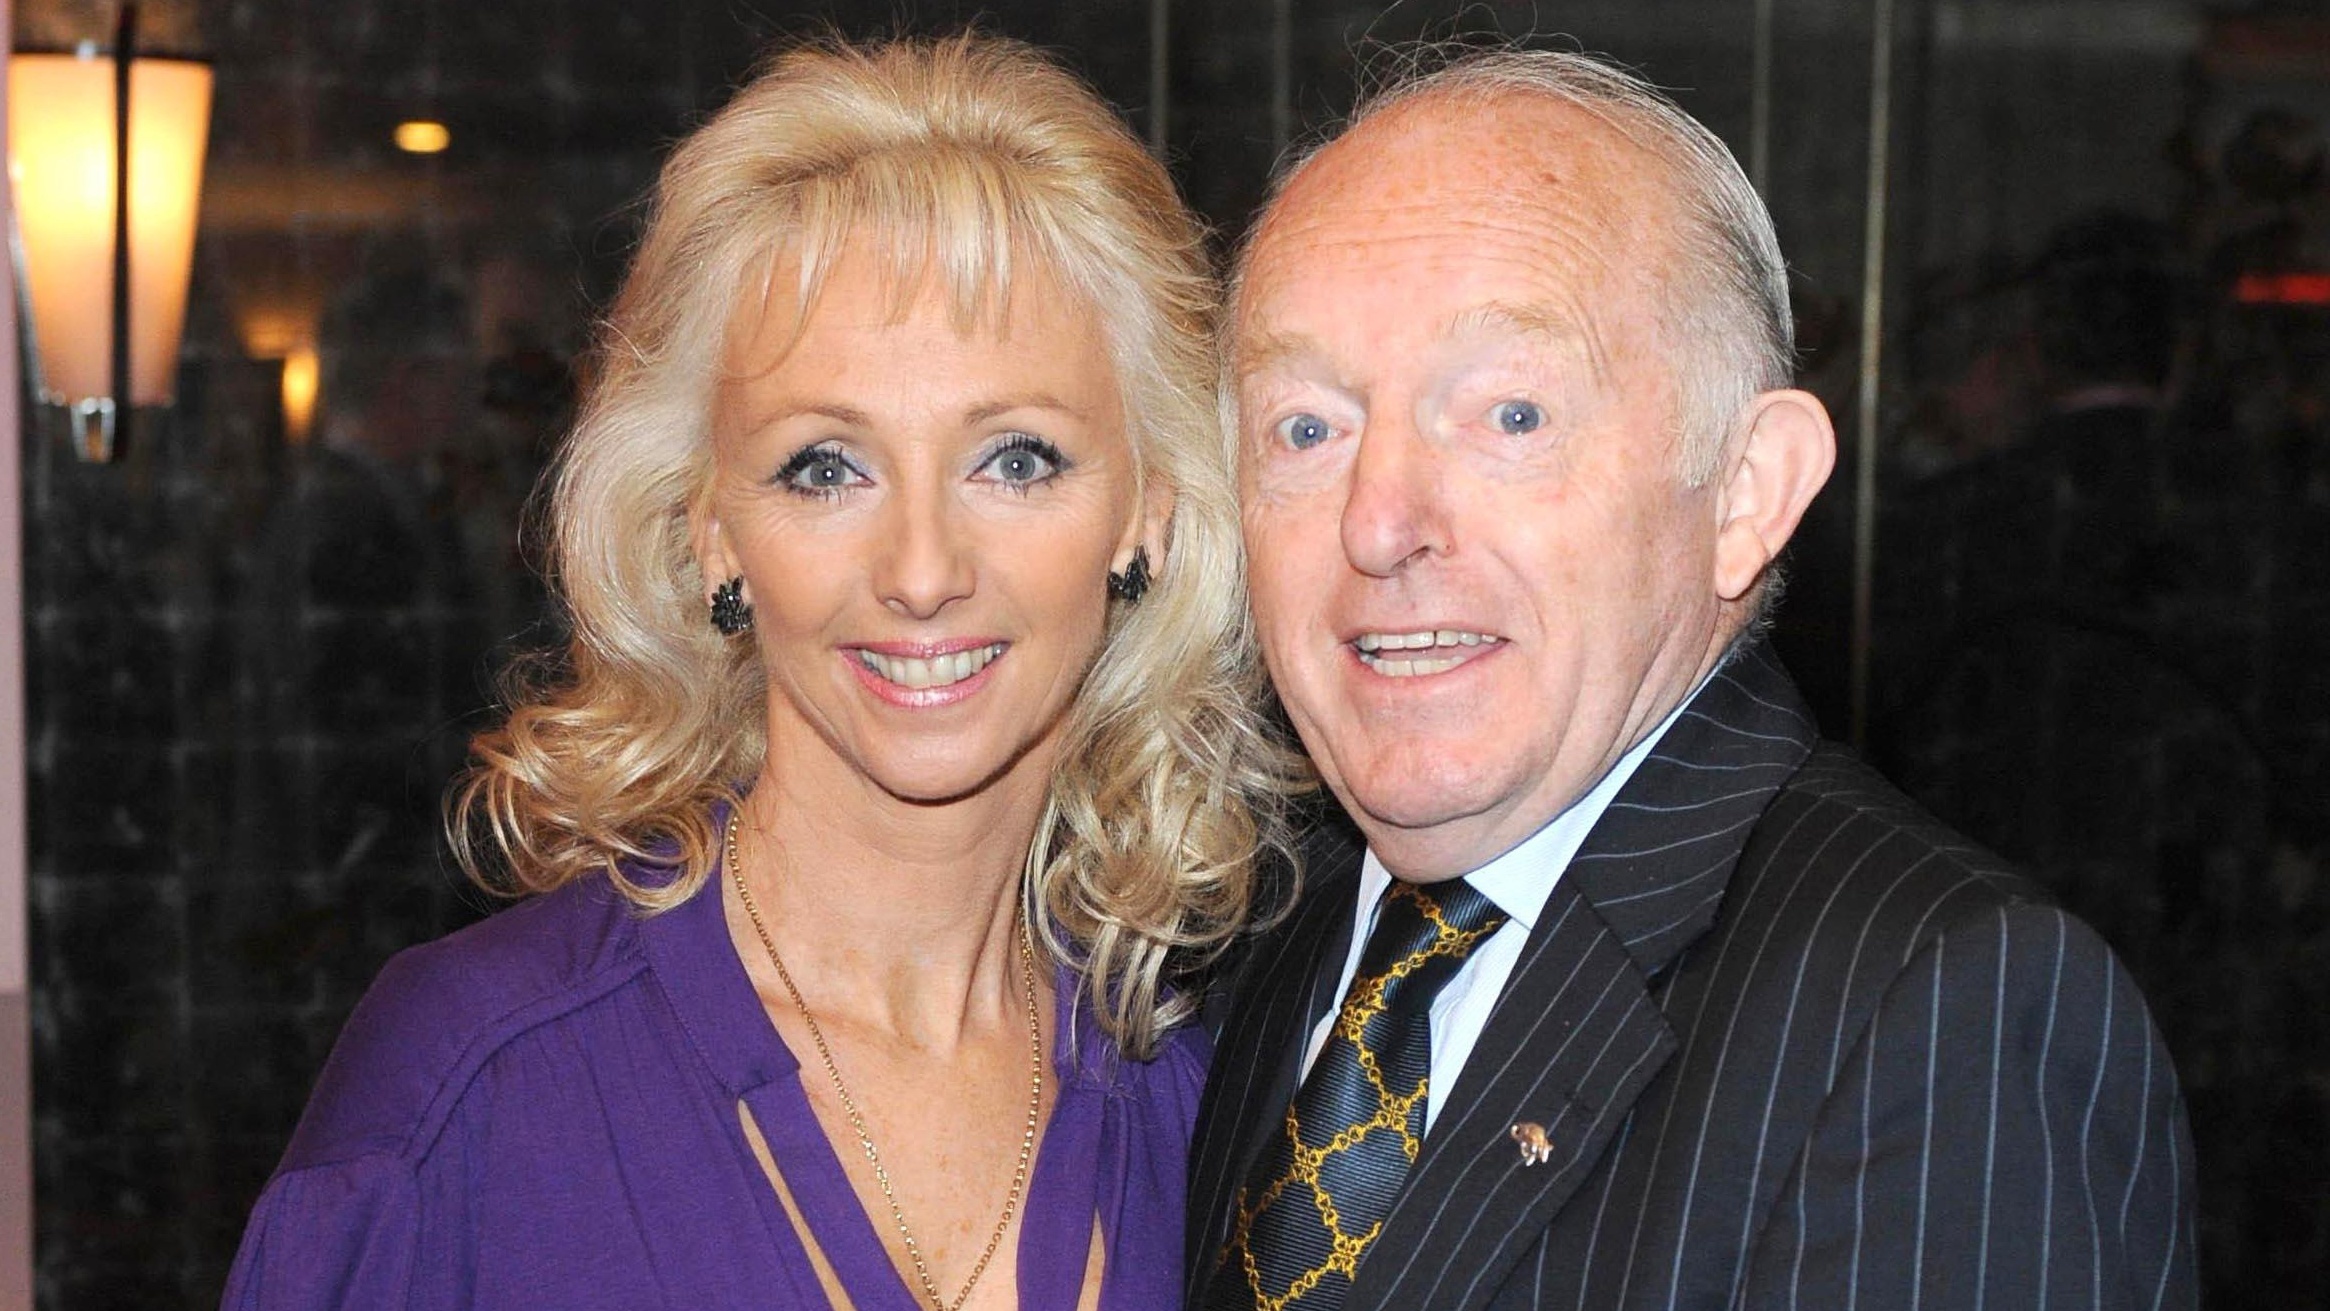 Strictly's Debbie McGee: 'Paul is looking down on me' - Sunday Post